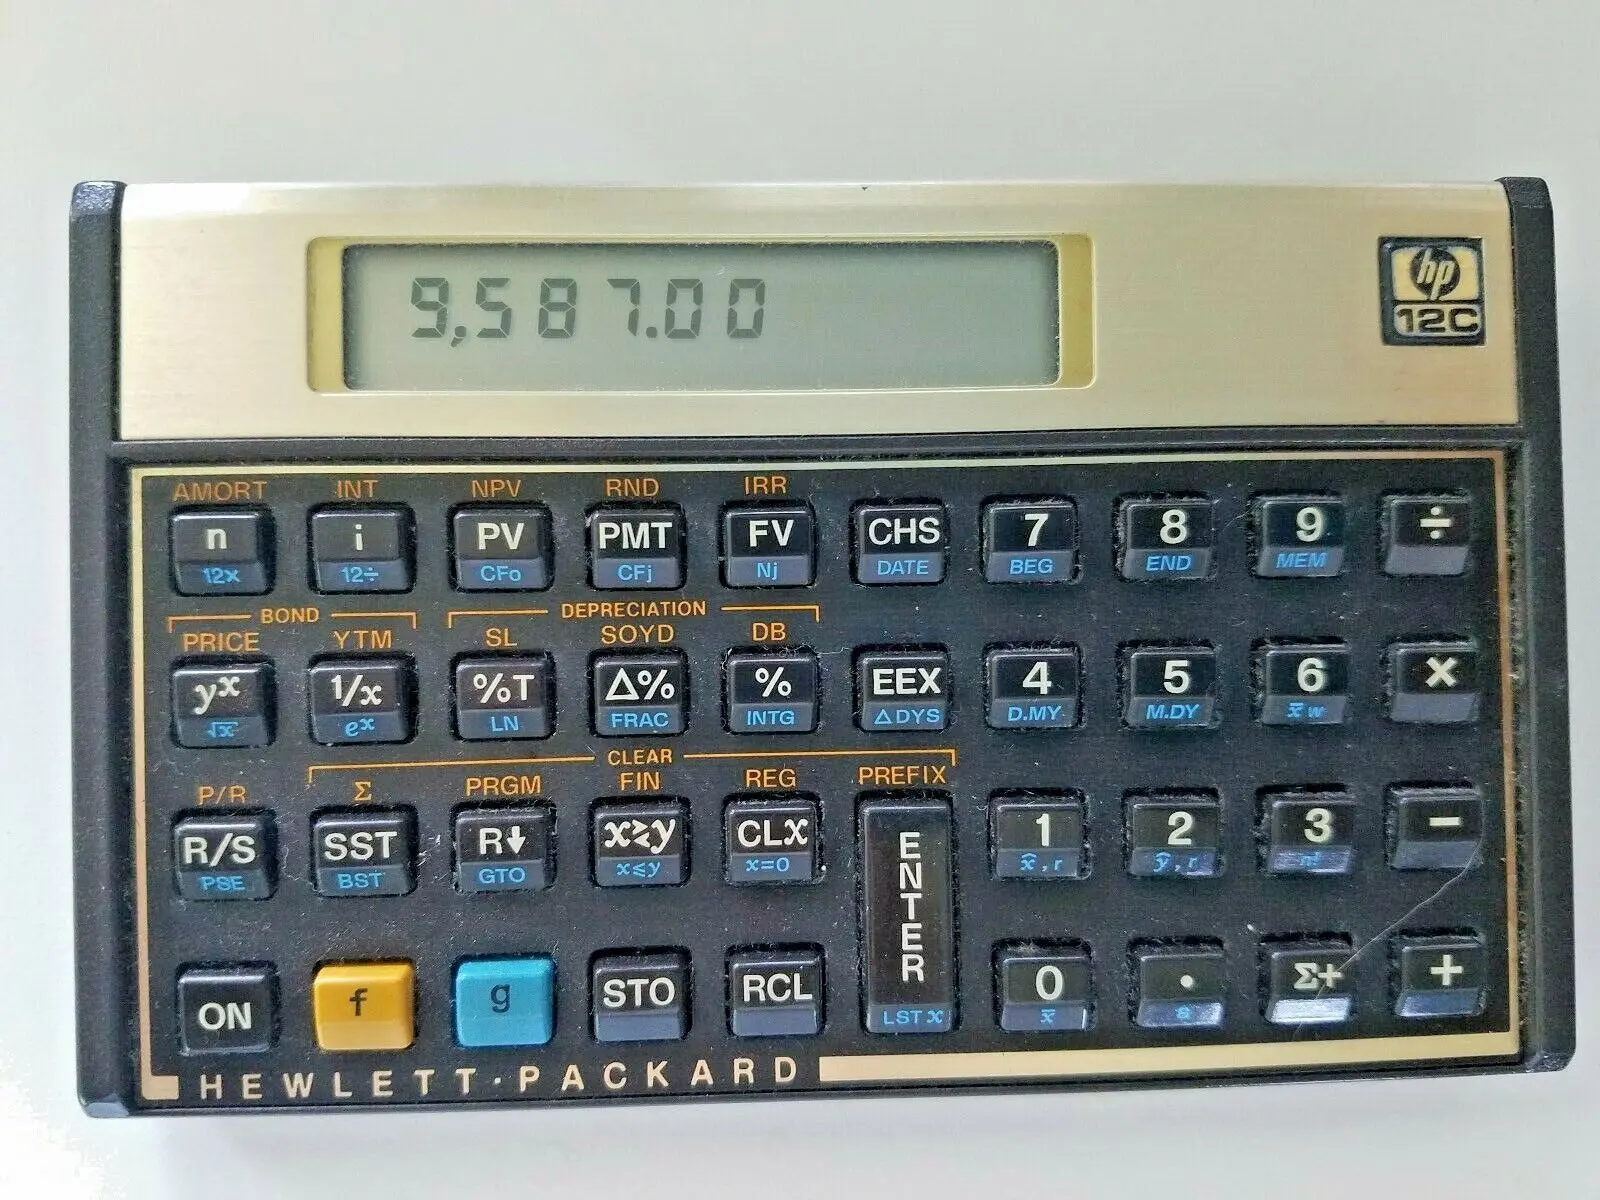 old hewlett packard calculator - Do old calculators have any value